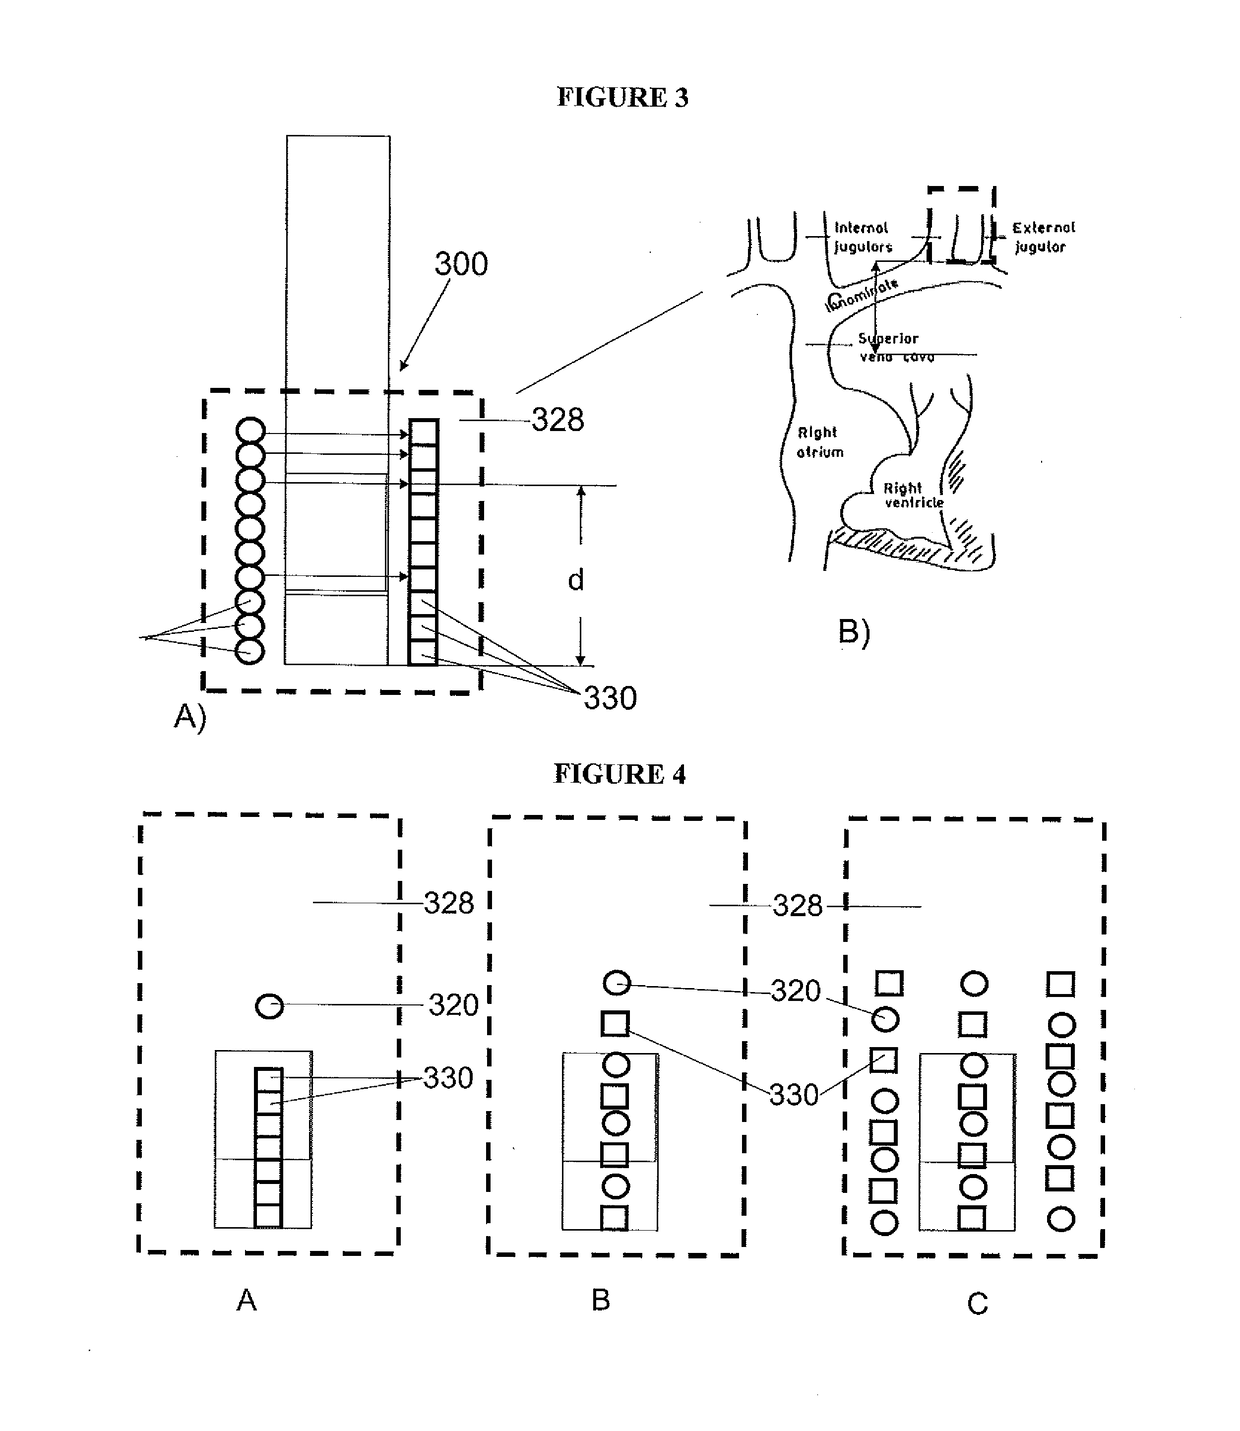 System and method for non-invasive monitoring of central venous pressure